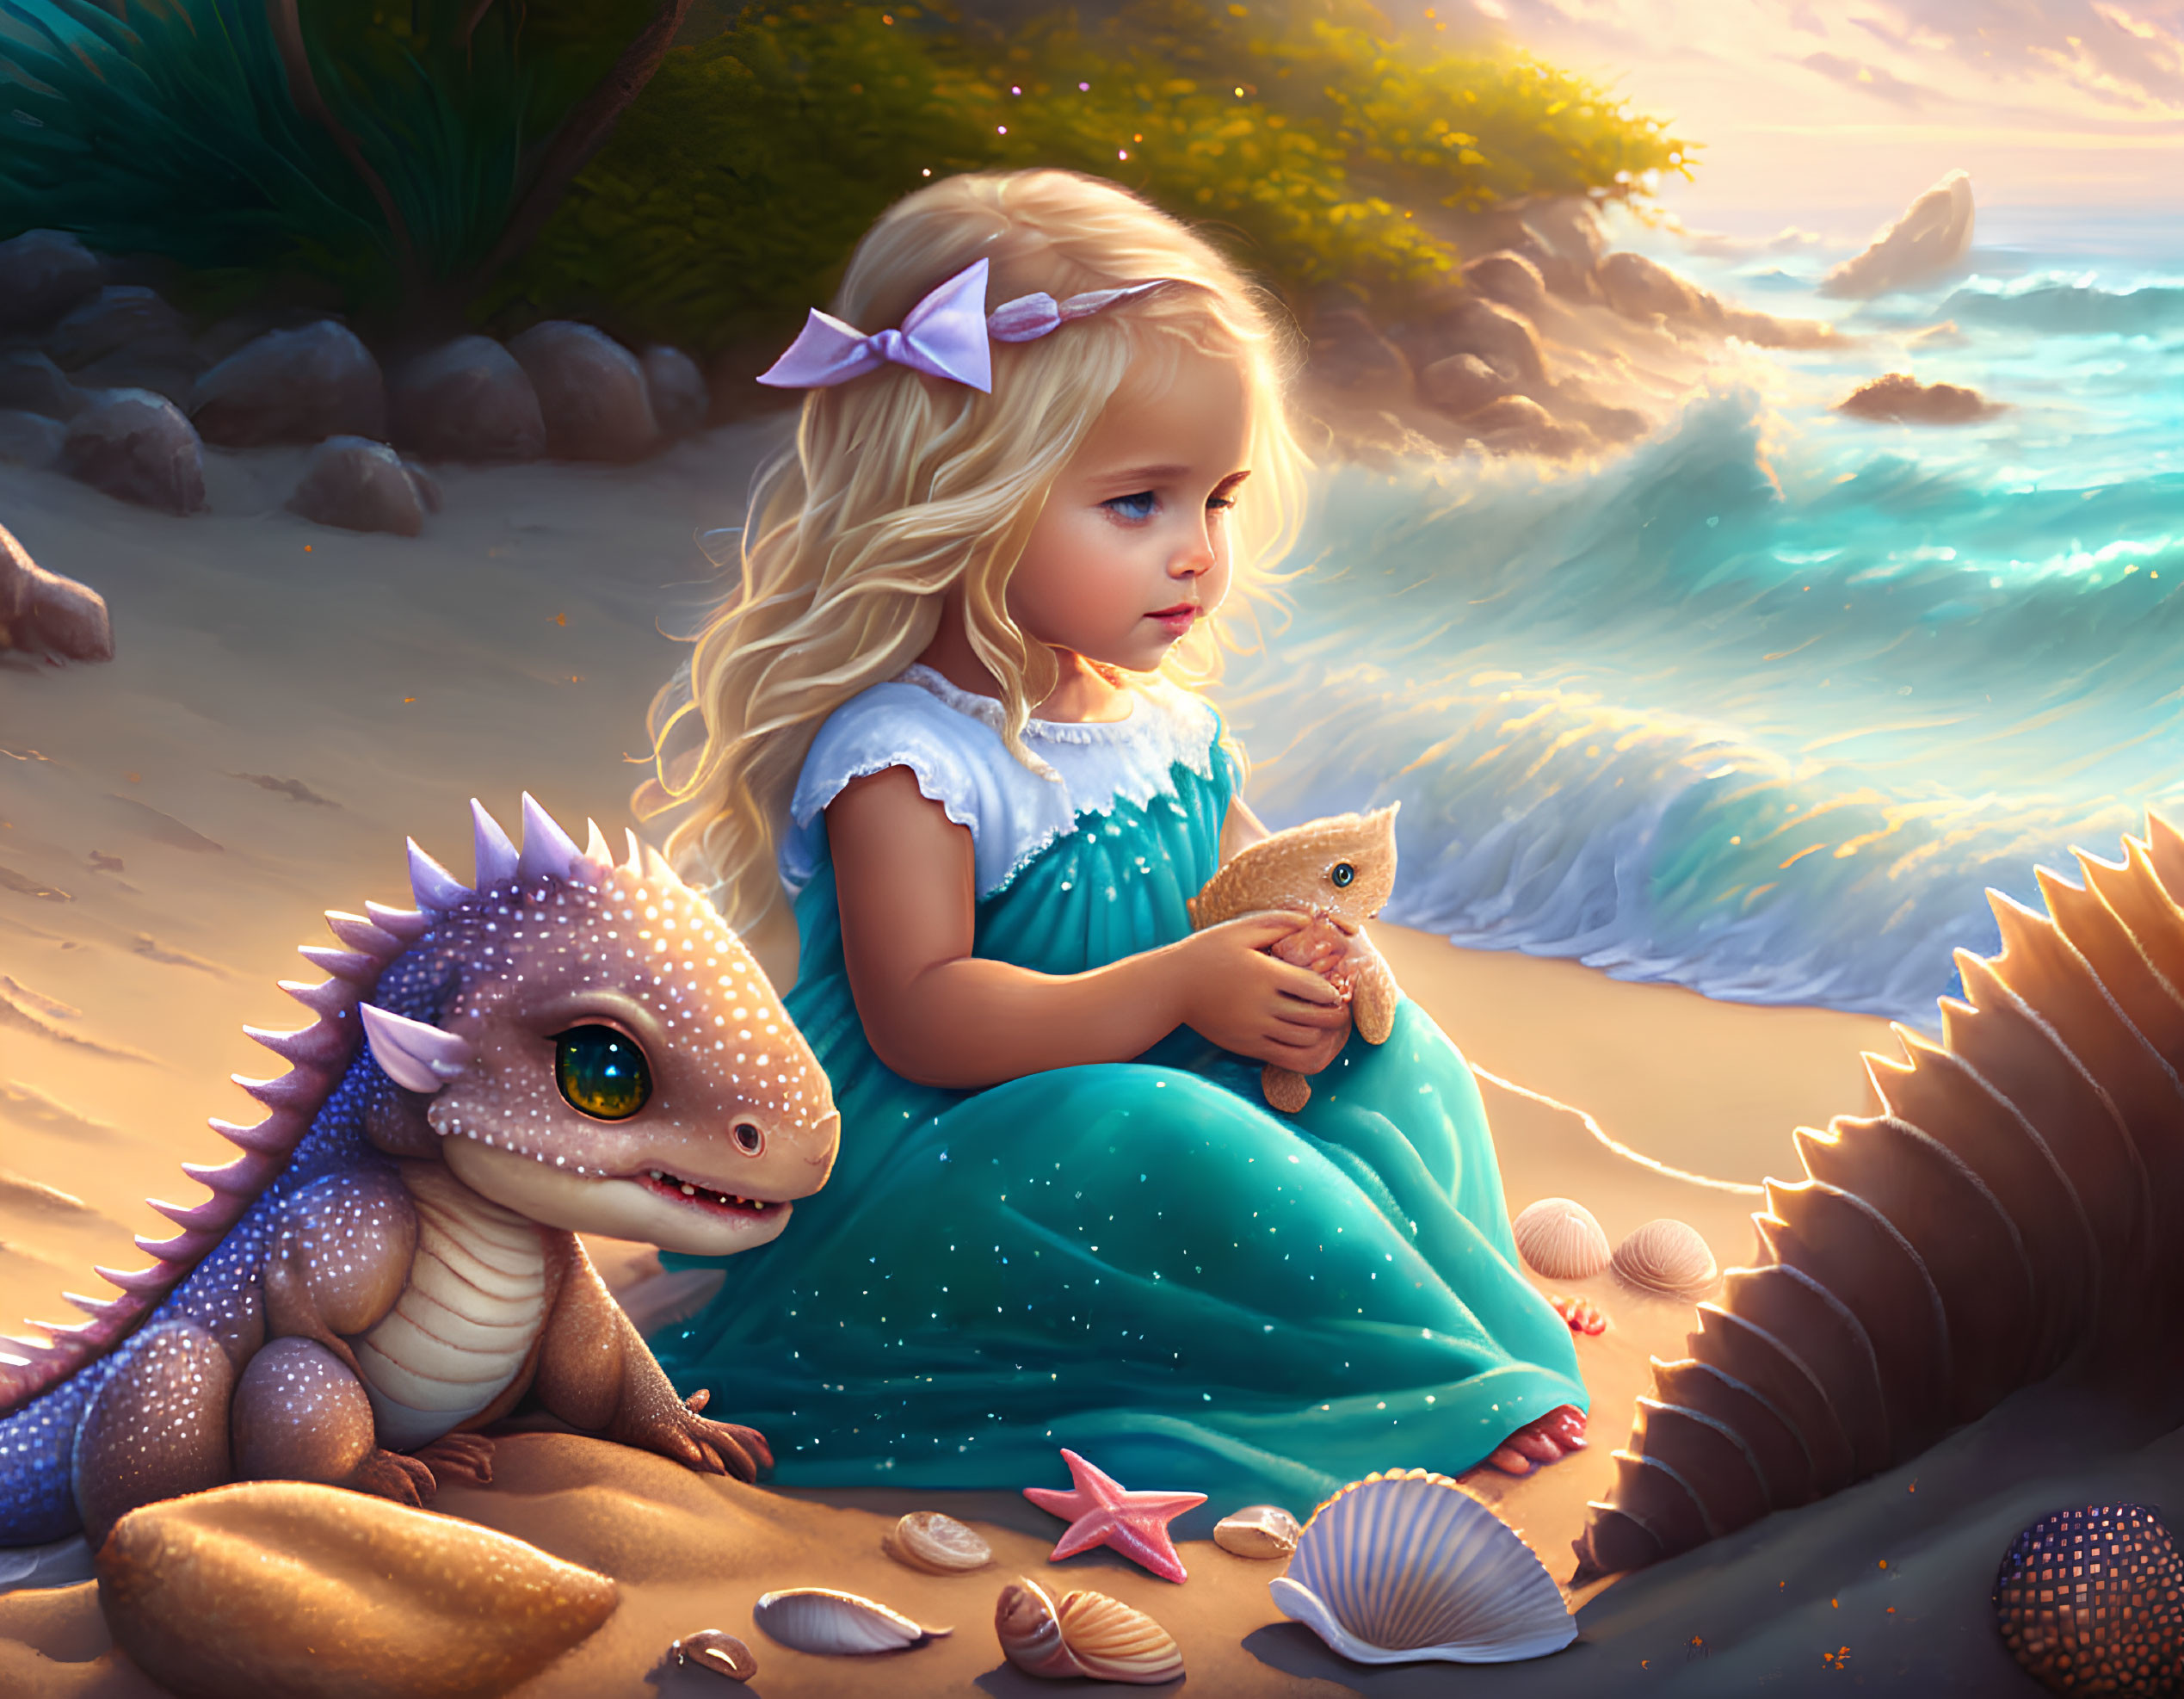 Young girl in blue dress with baby dragon on beach at sunset with shells and starfish.